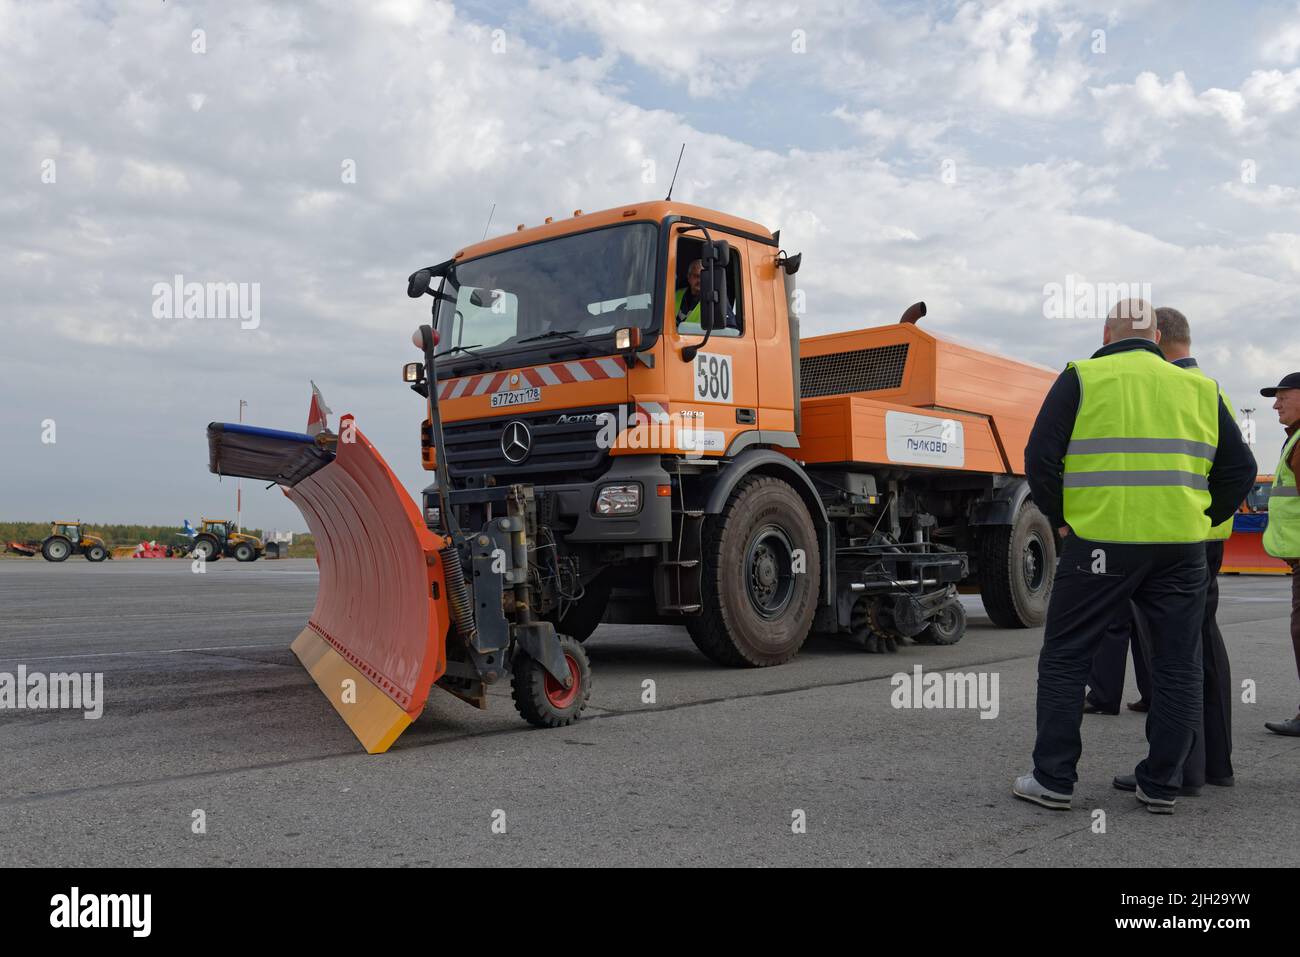 St. Petersburg, Russia - September 24, 2015: Snow removal vehicle during the annual review of equipment in the Pulkovo airport Stock Photo